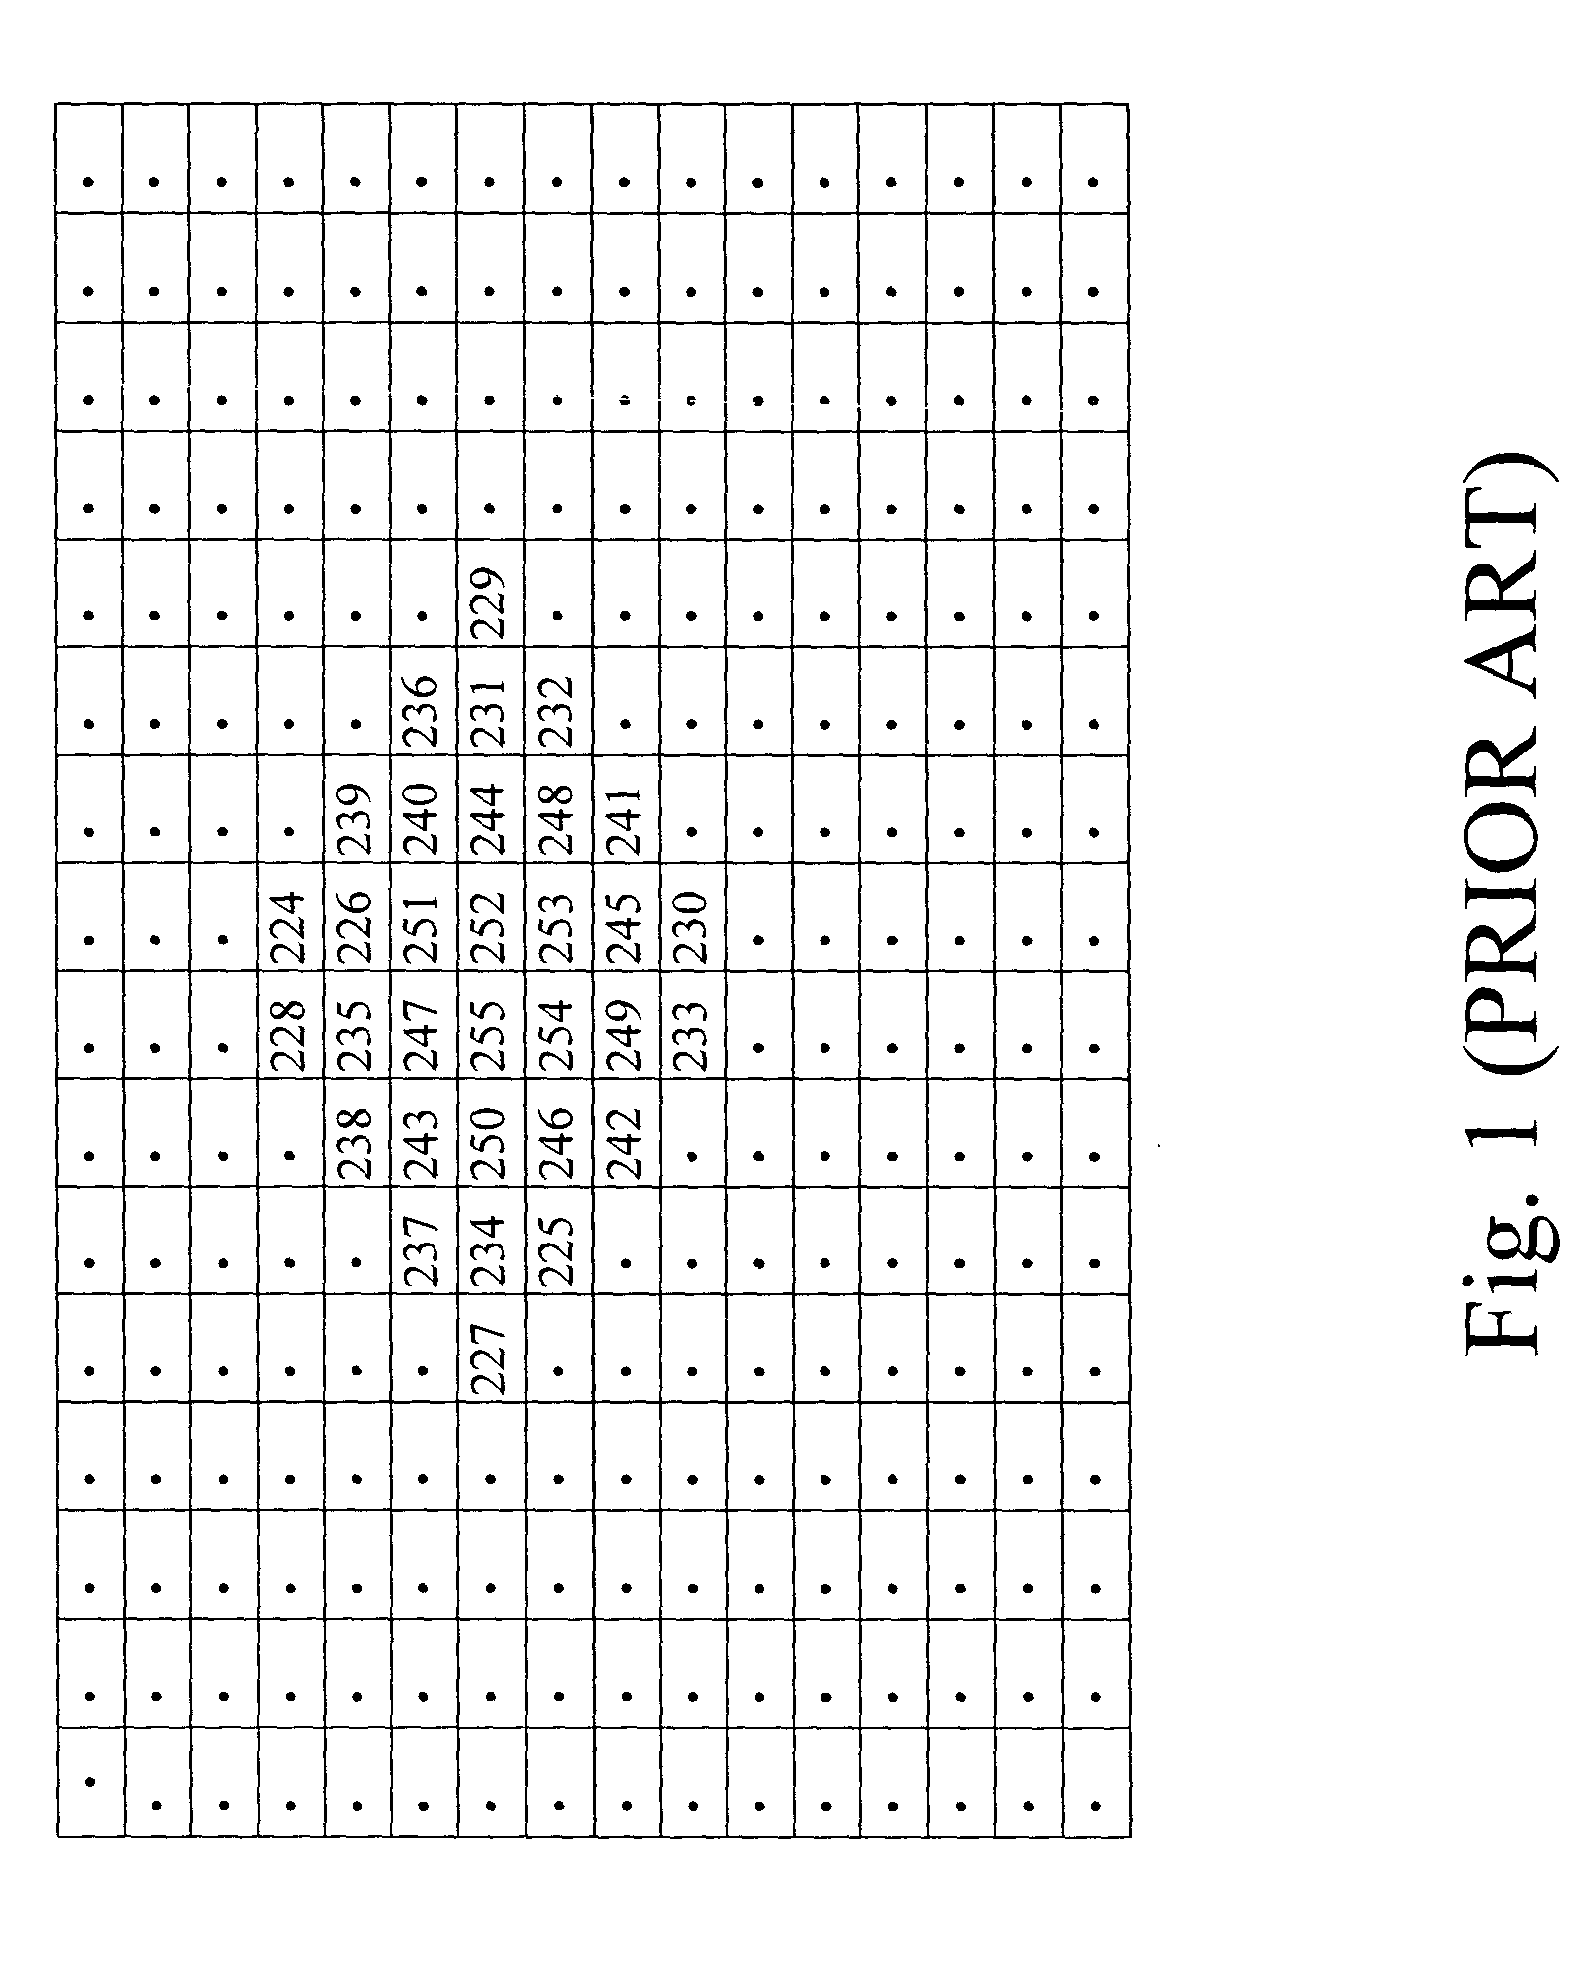 Method of nonlinear calibration of halftone screen